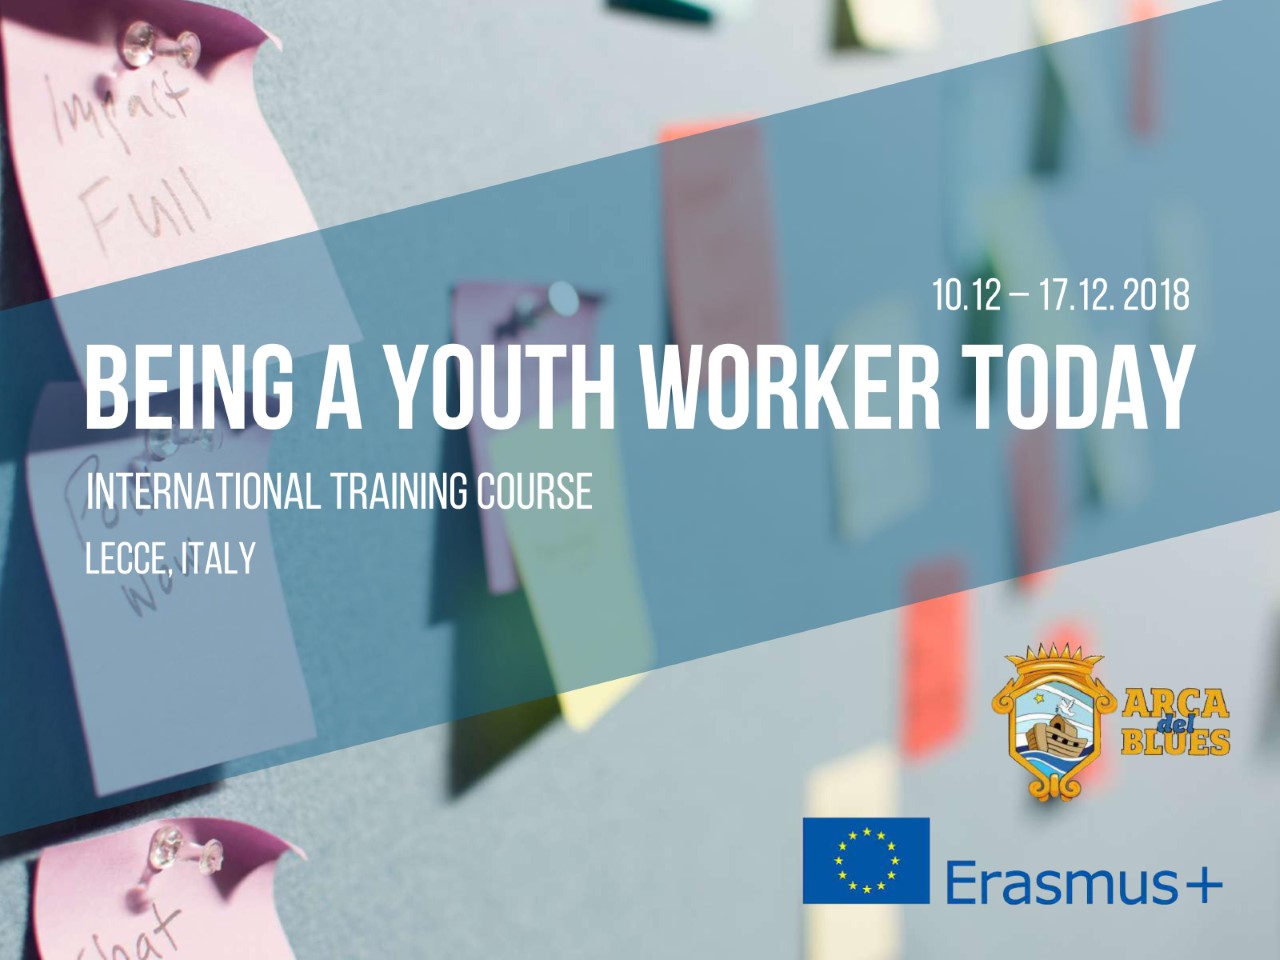 Being a Youth Worker Today. Francis Allenby in formazione internazionale con Erasmus+